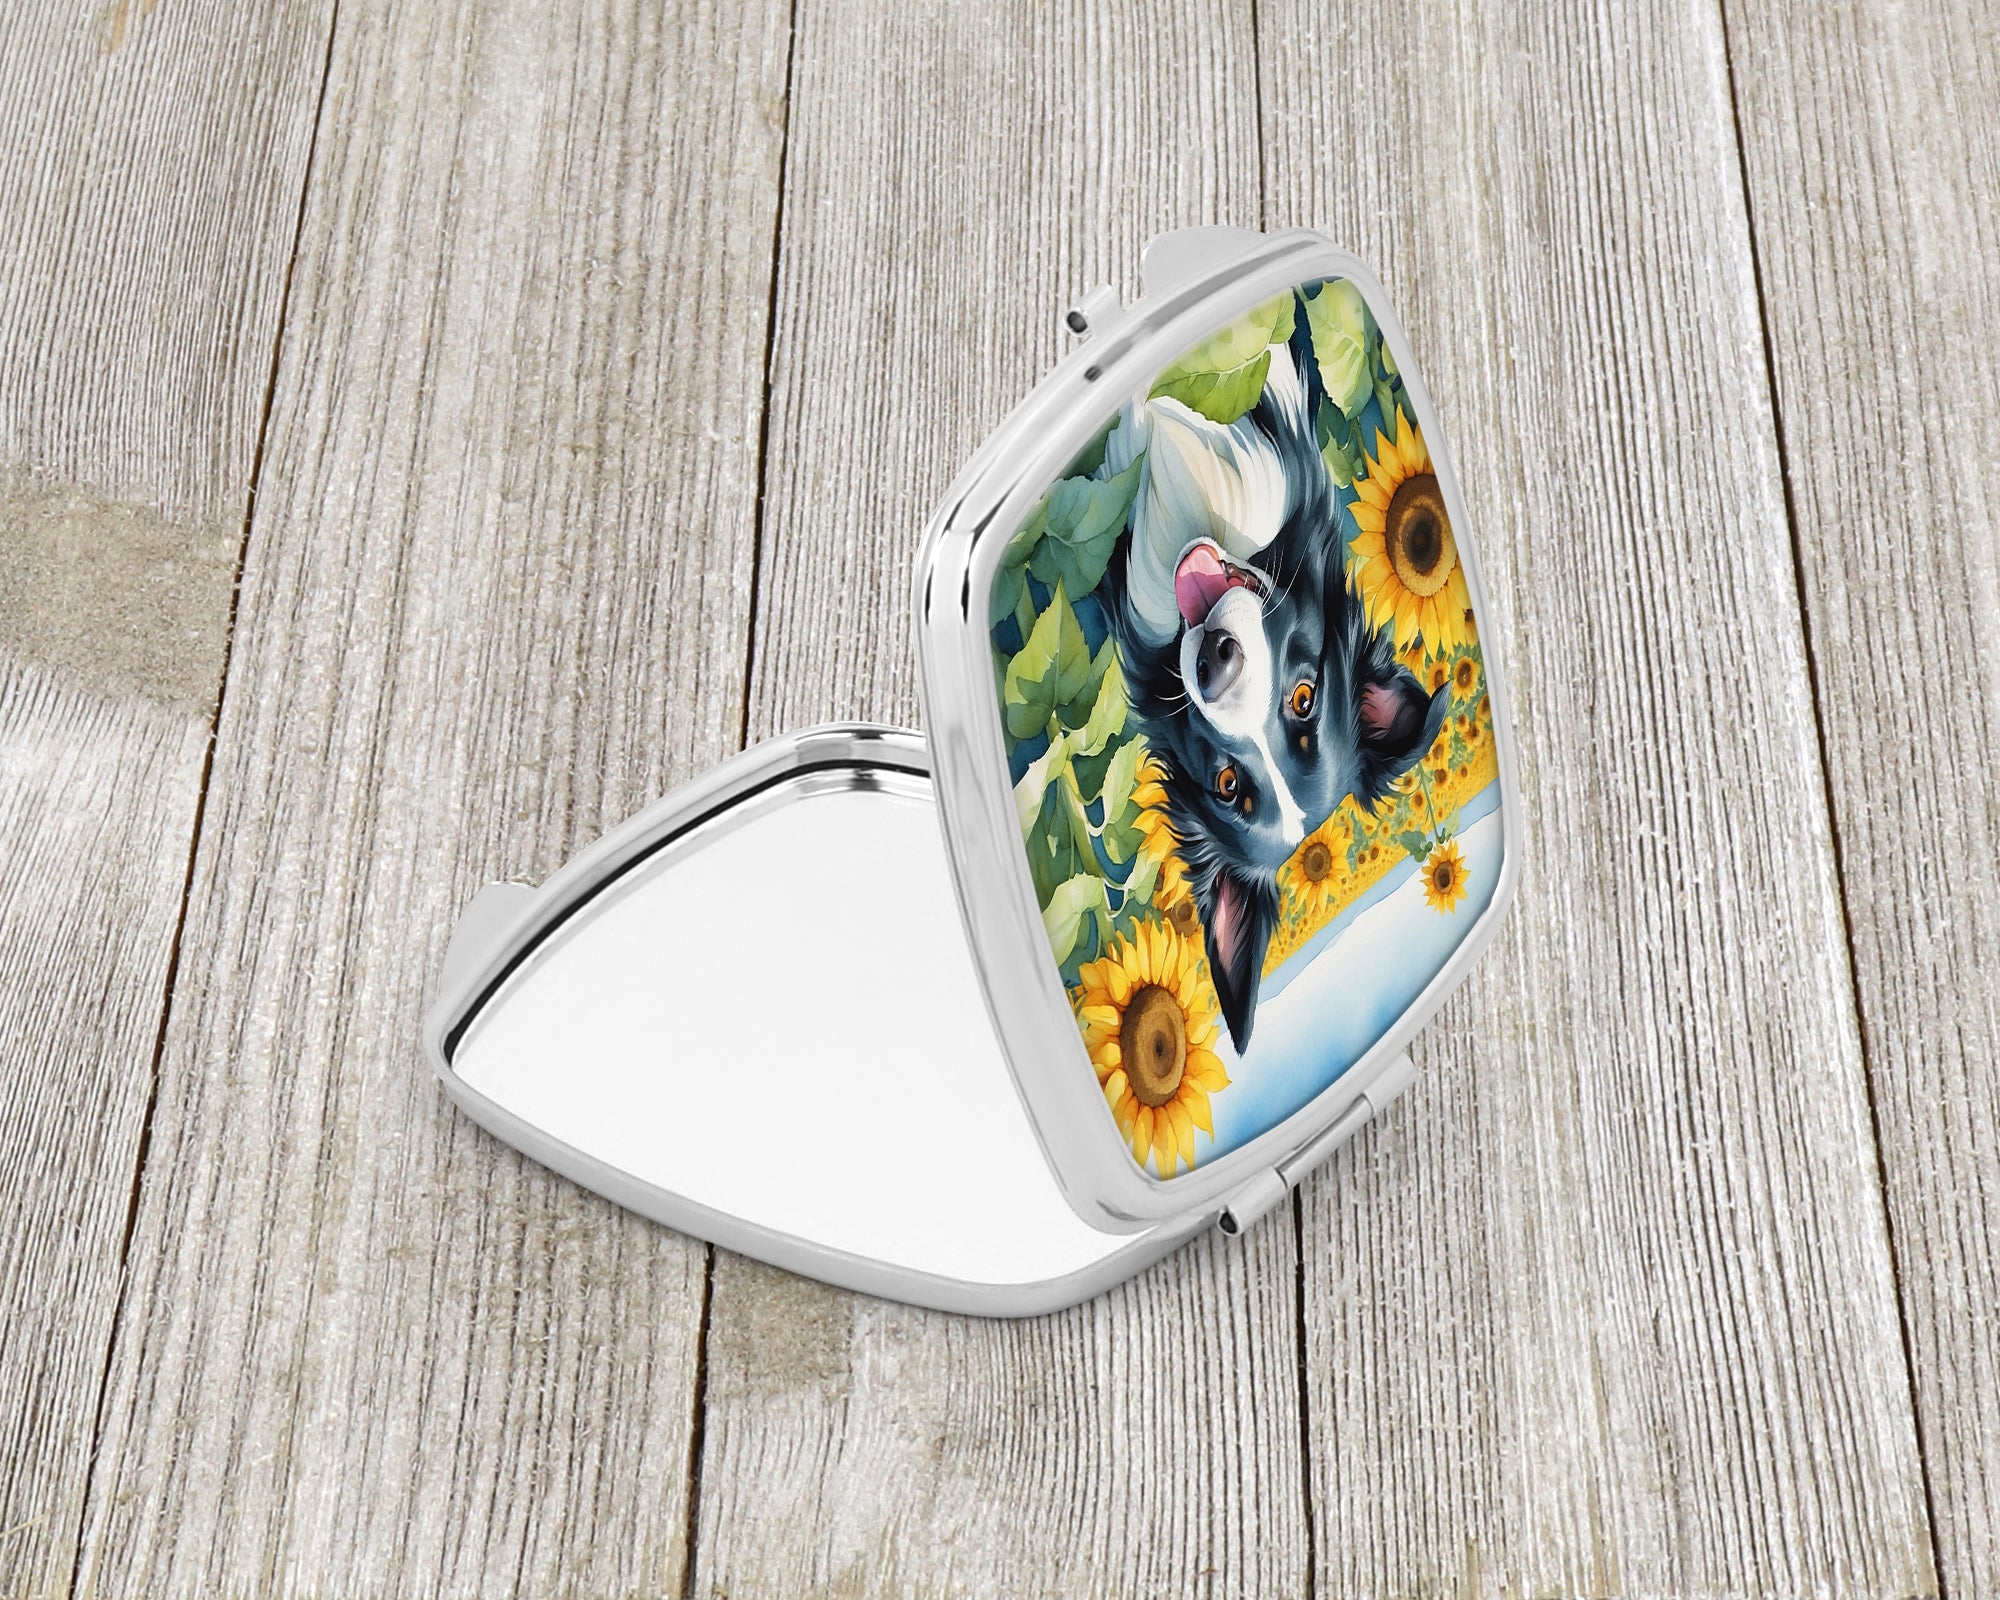 Buy this Border Collie in Sunflowers Compact Mirror